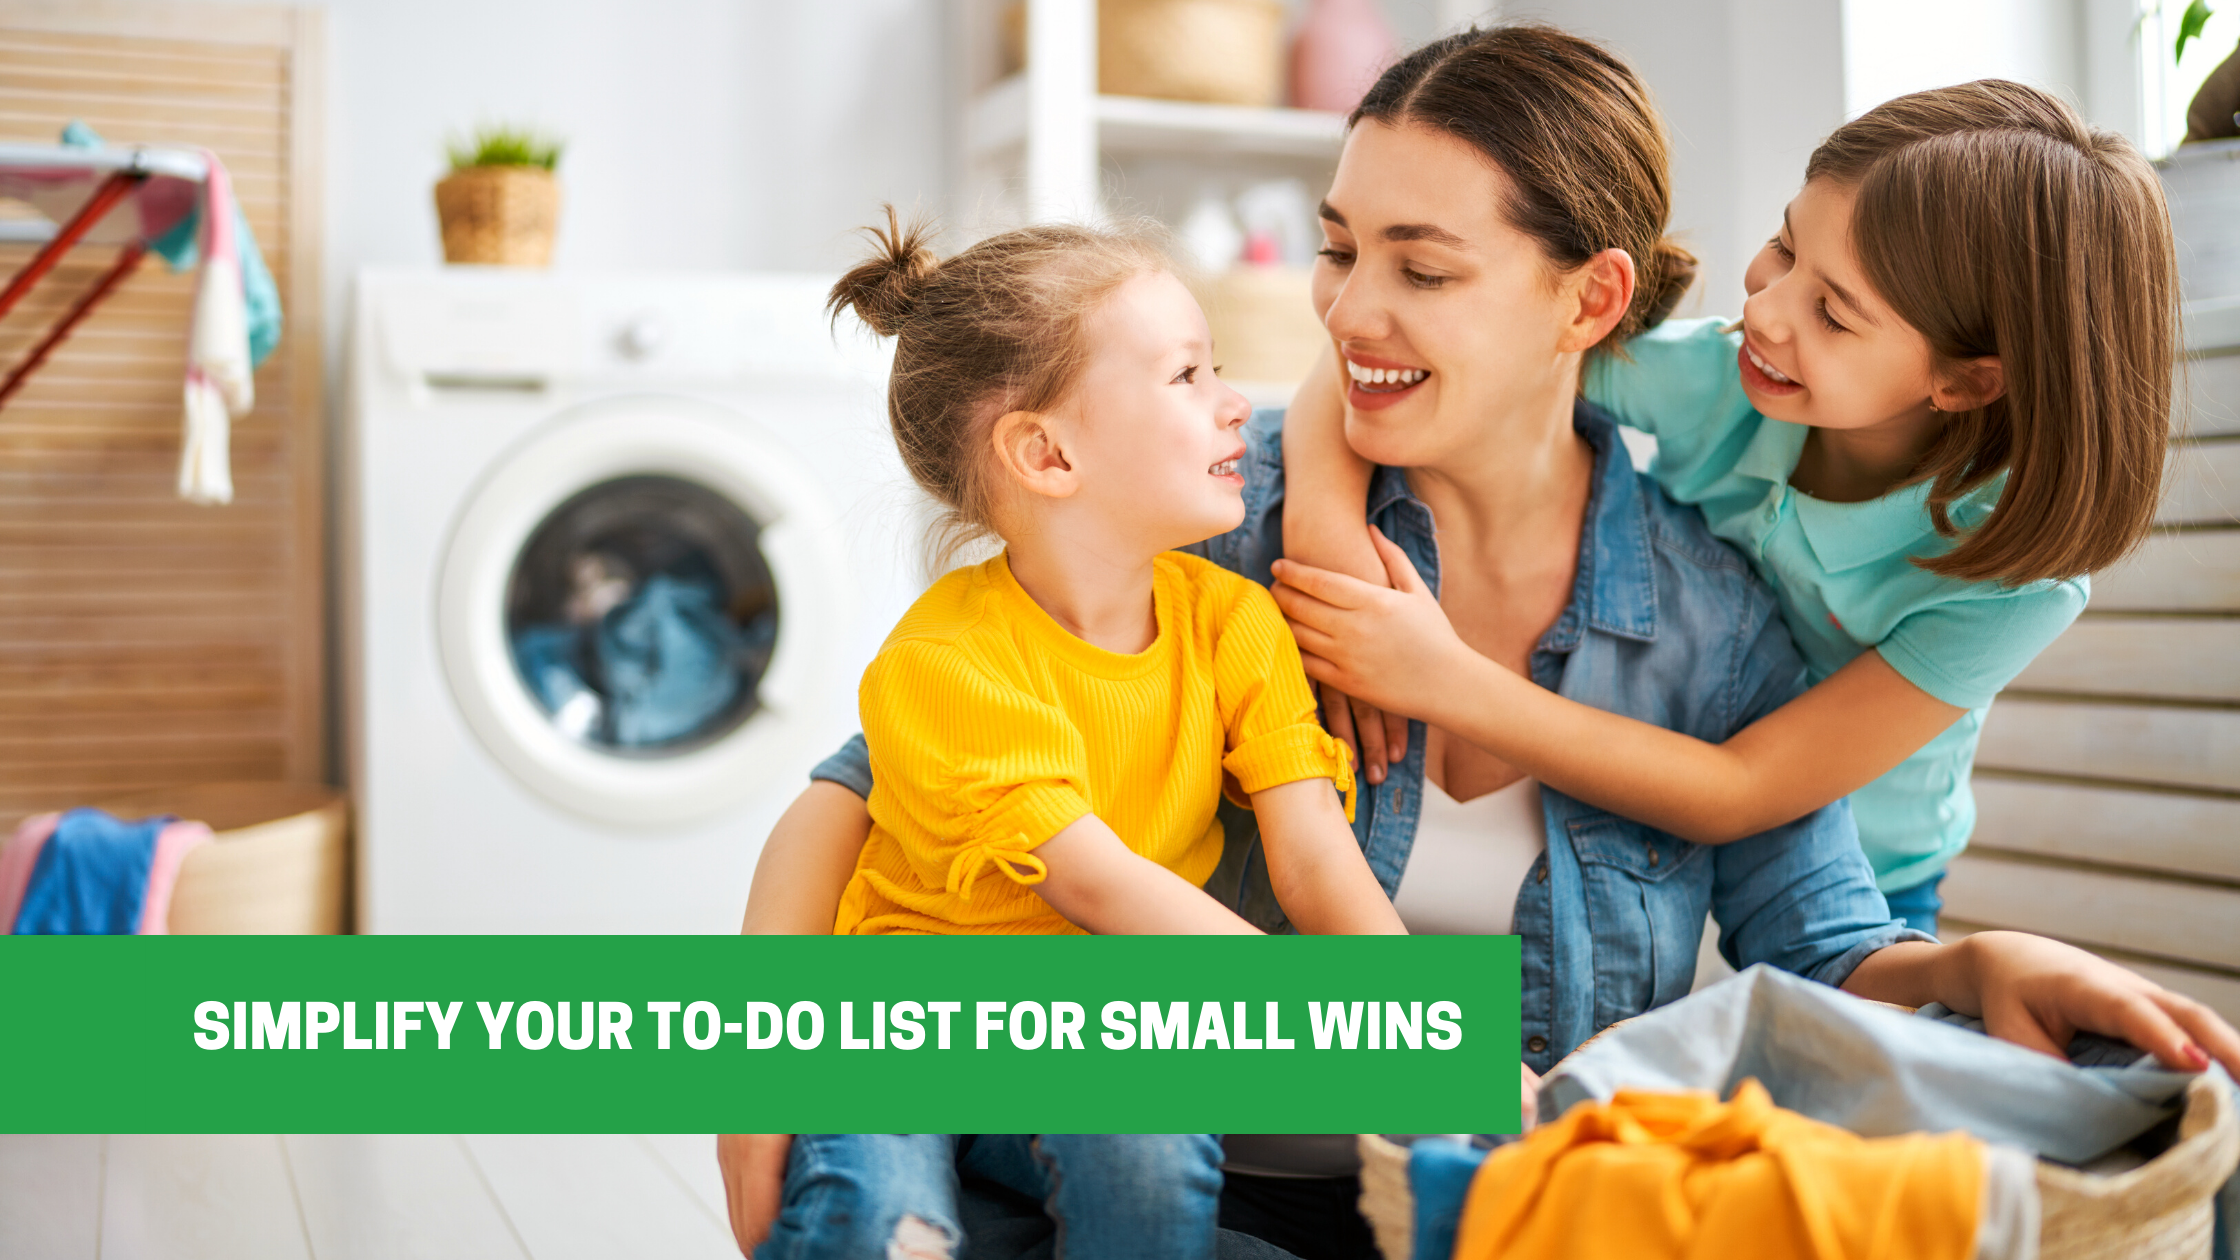 Simplify Your To-Do List for Small Wins ; Mother and two daughter doing laundry